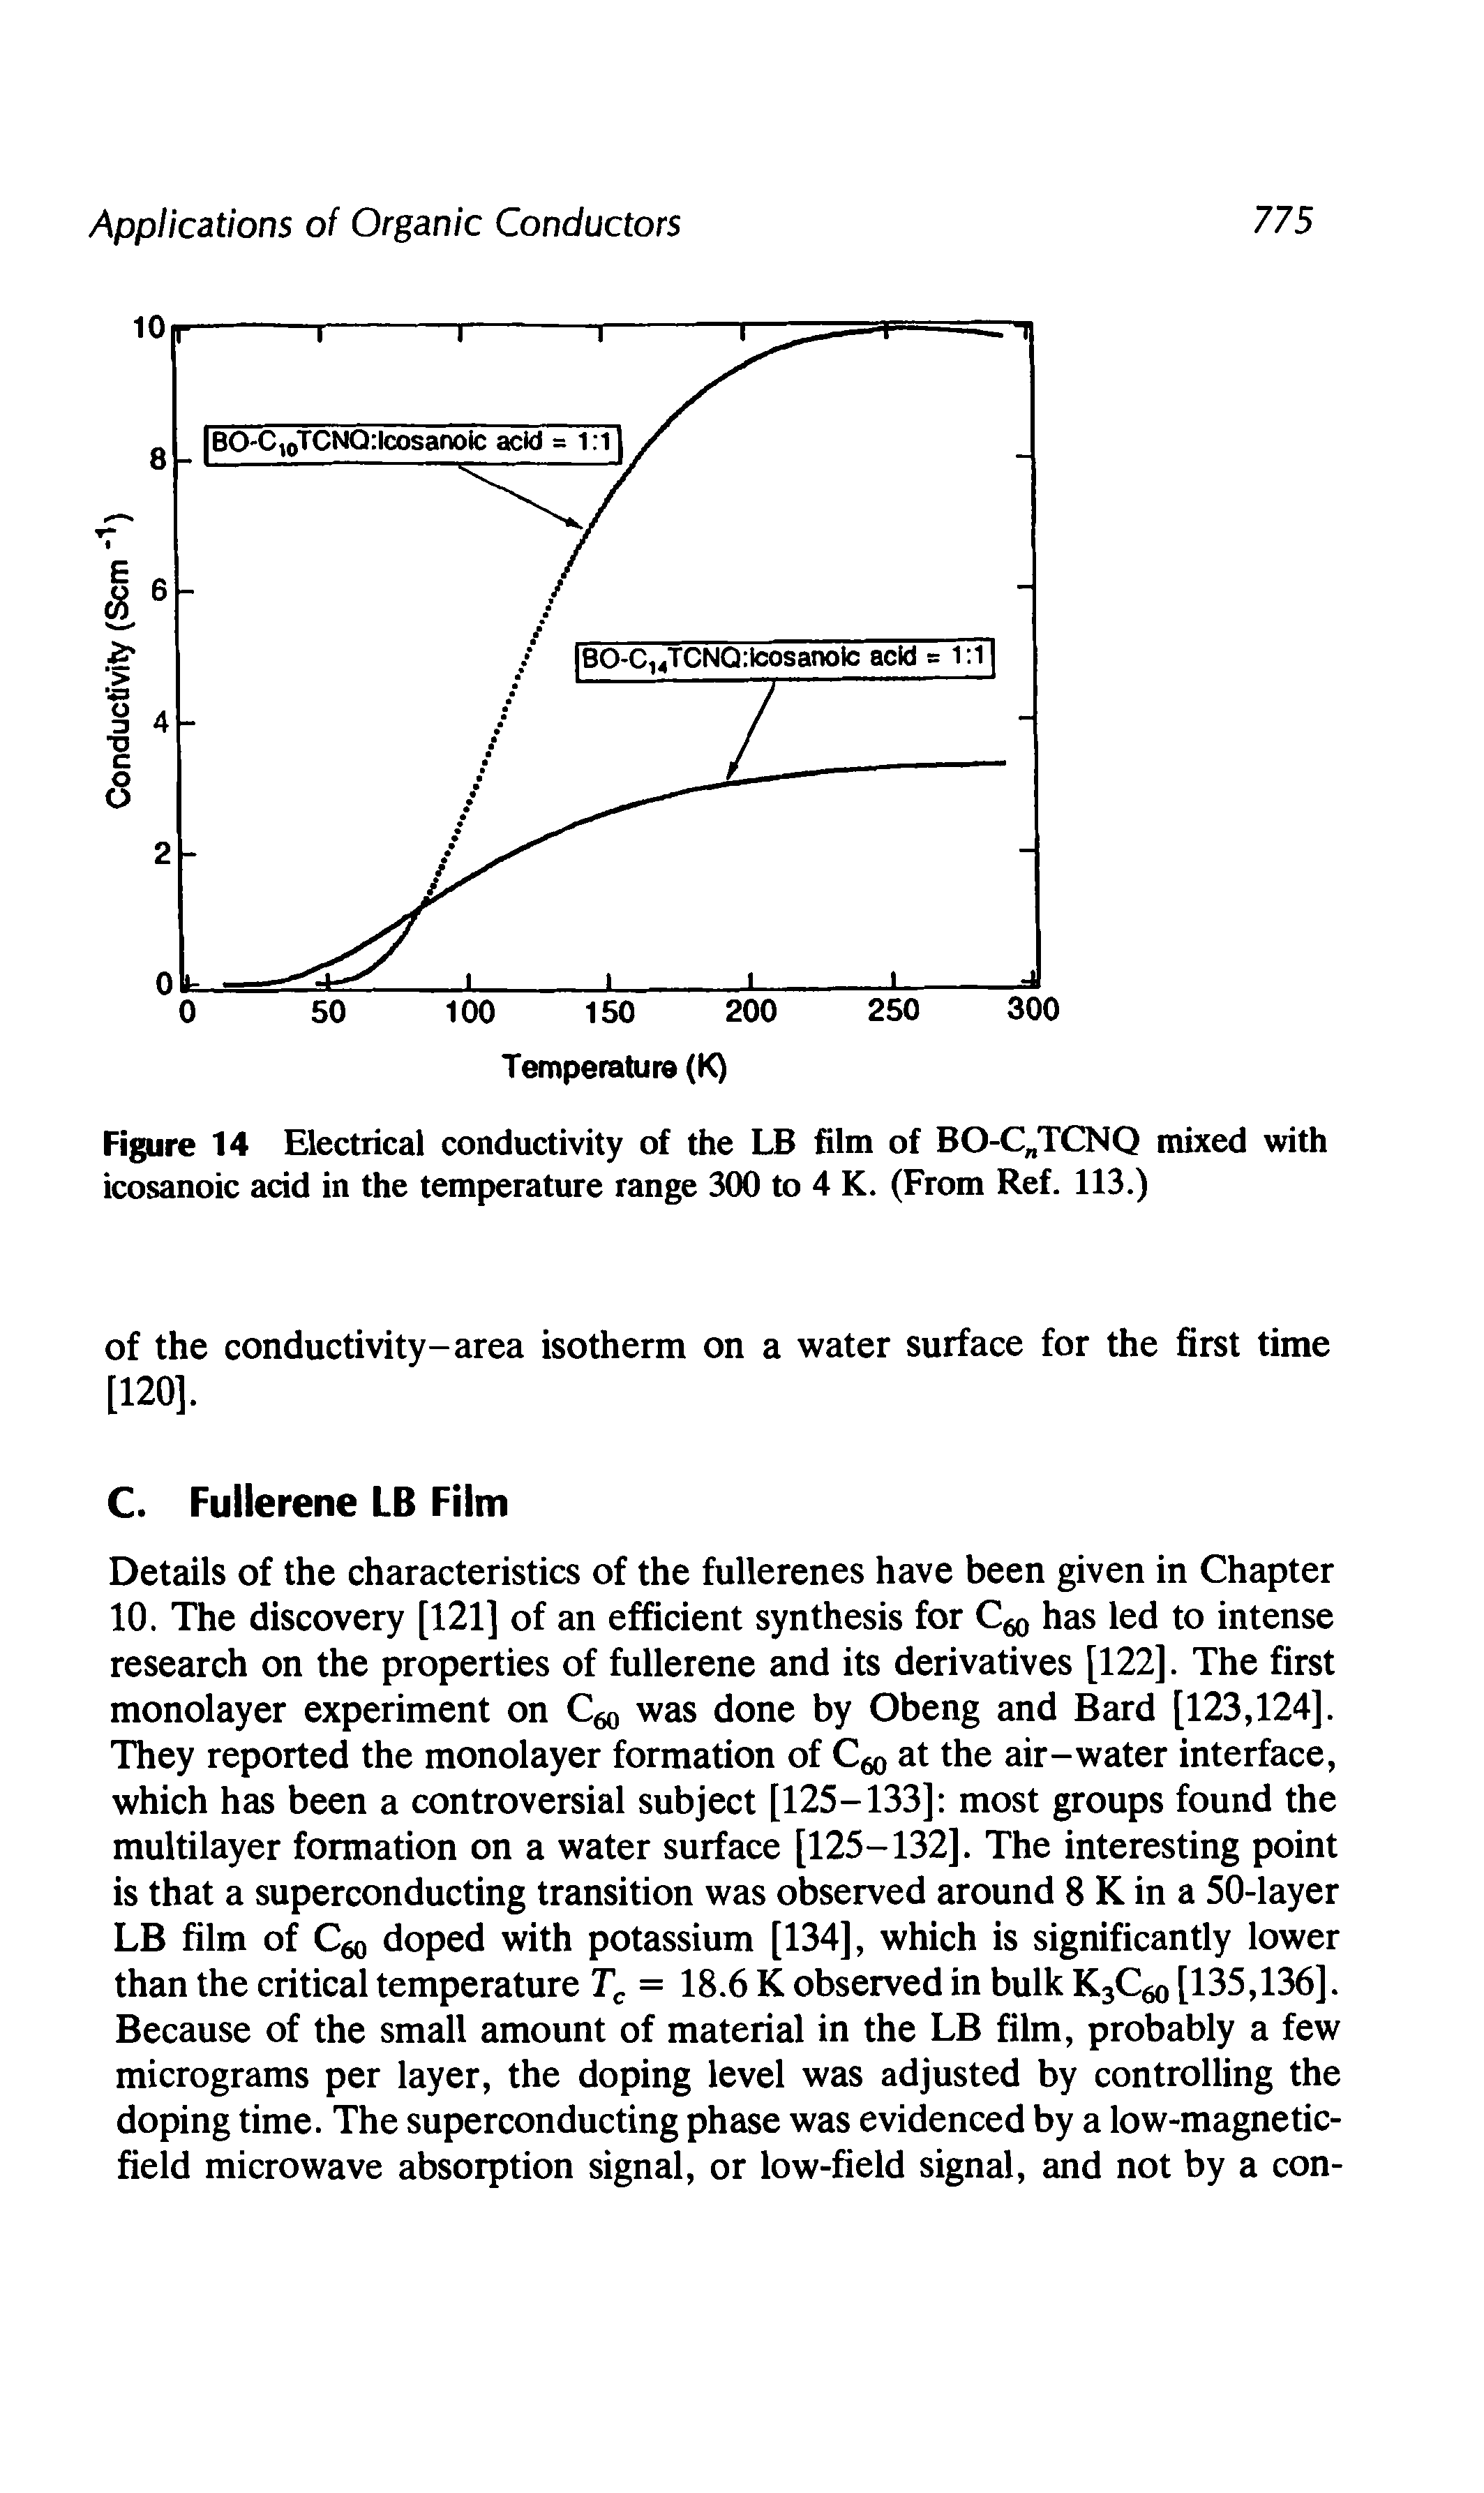 Figure 14 Electrical conductivity of the LB film of BO-C TCNQ mixed with icosanoic acid in the temperature range 300 to 4 K. (From Ref. 113.)...